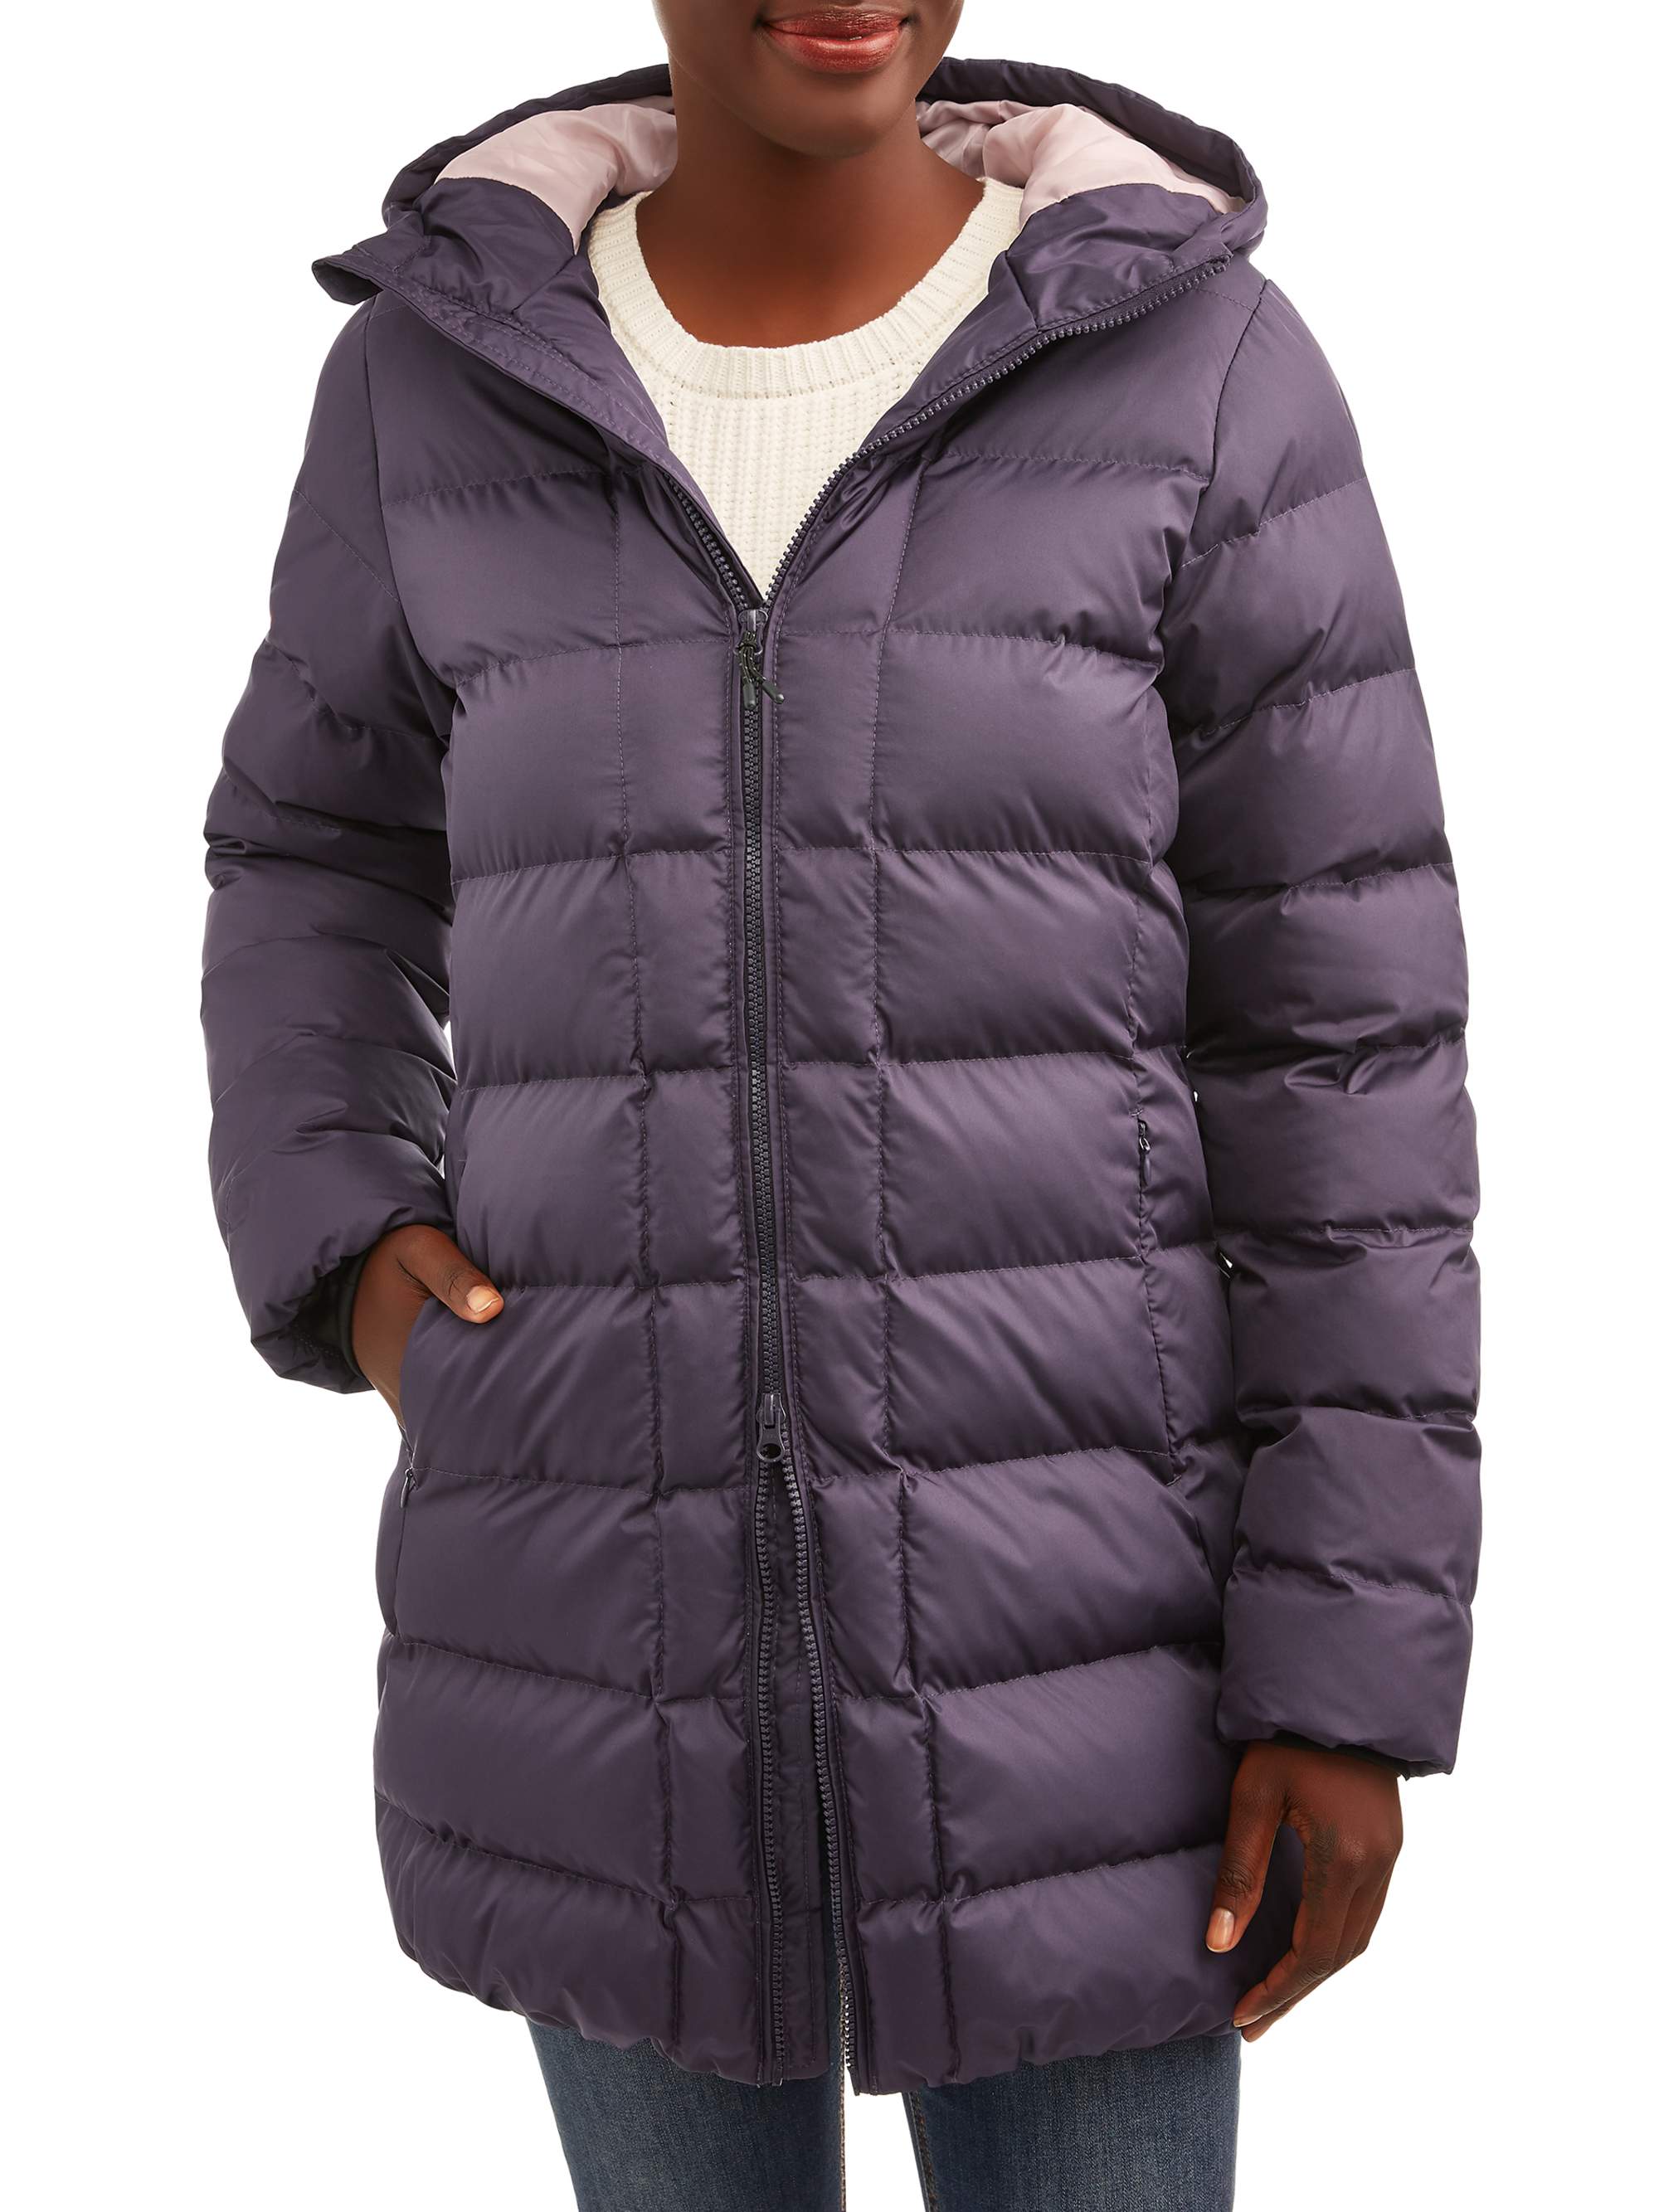 Iceburg Women's Long Insulated Parka - image 1 of 4